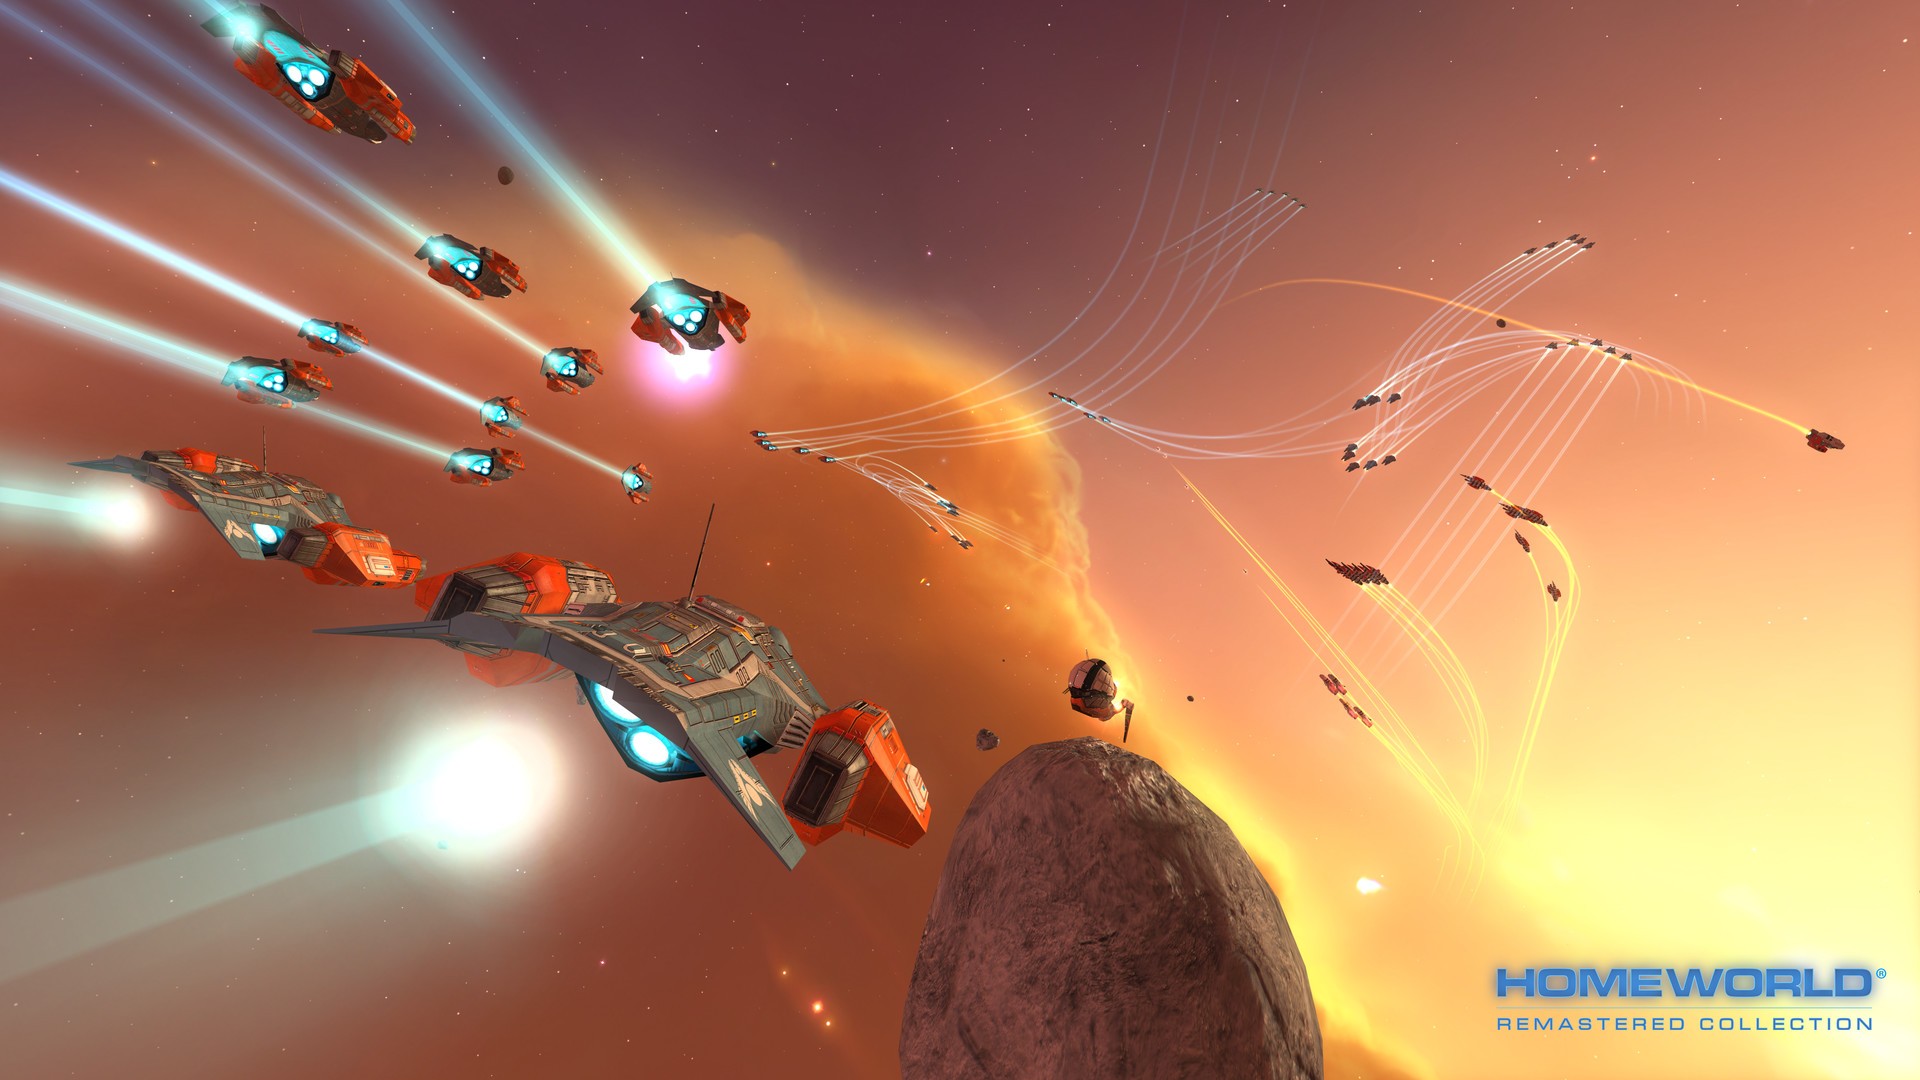 homeworld remastered collection sysytem requirments